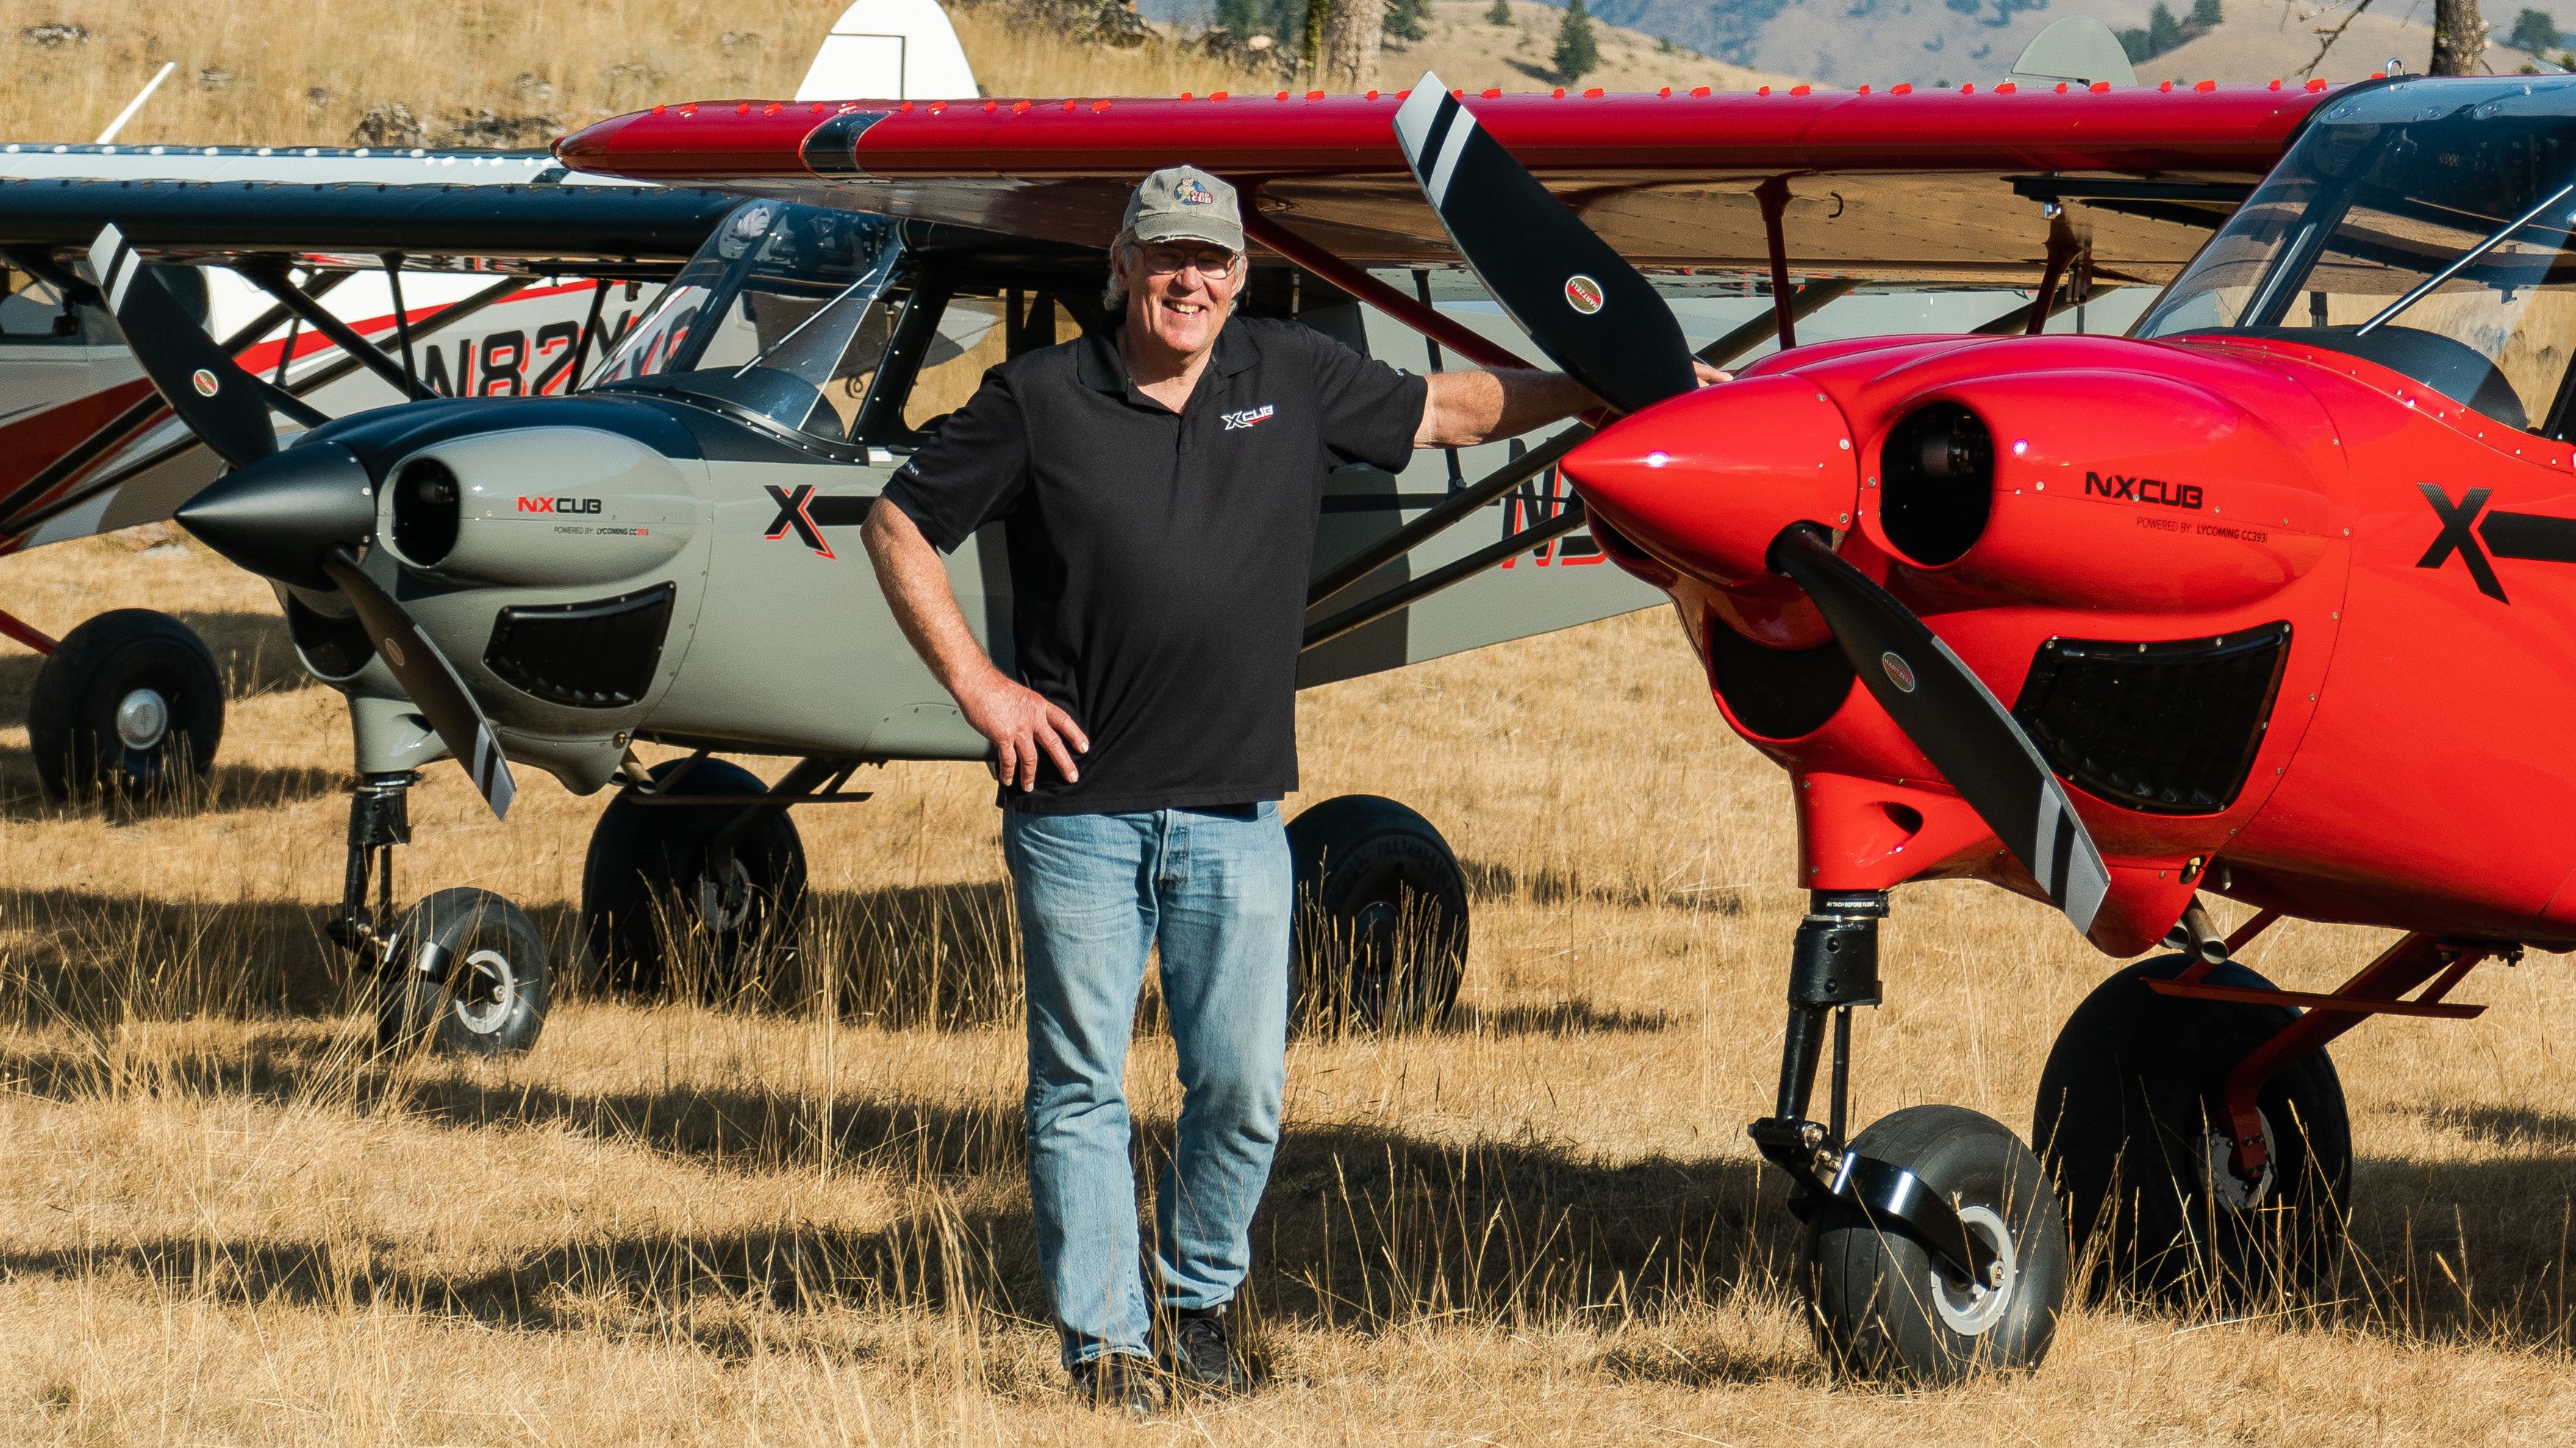 CubCrafters Founder Jim Richmond died of natural causes on November 21 in Yakima, Washington. He is pictured with two examples of the company’s NXCub. Photo courtesy of CubCrafters.